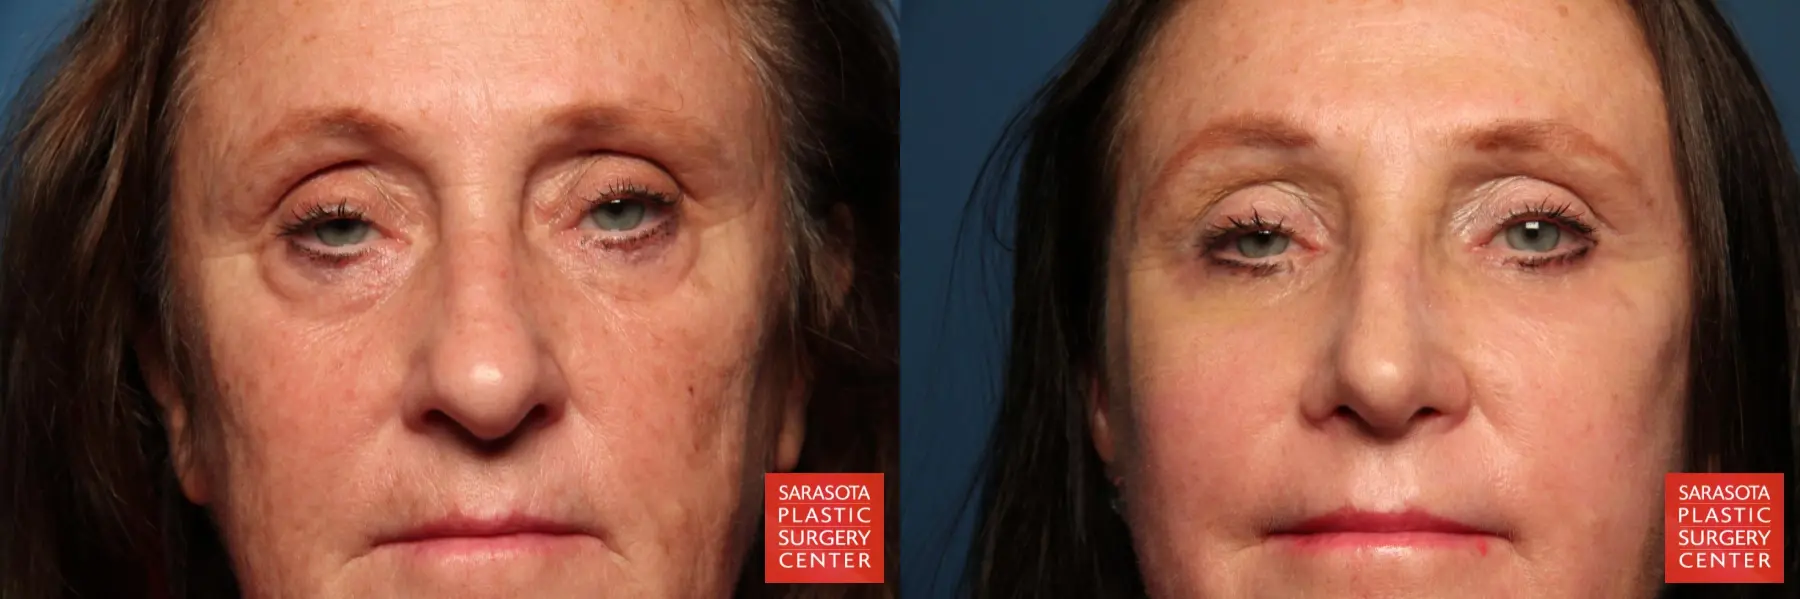 Fat Transfer - Face: Patient 4 - Before and After 1